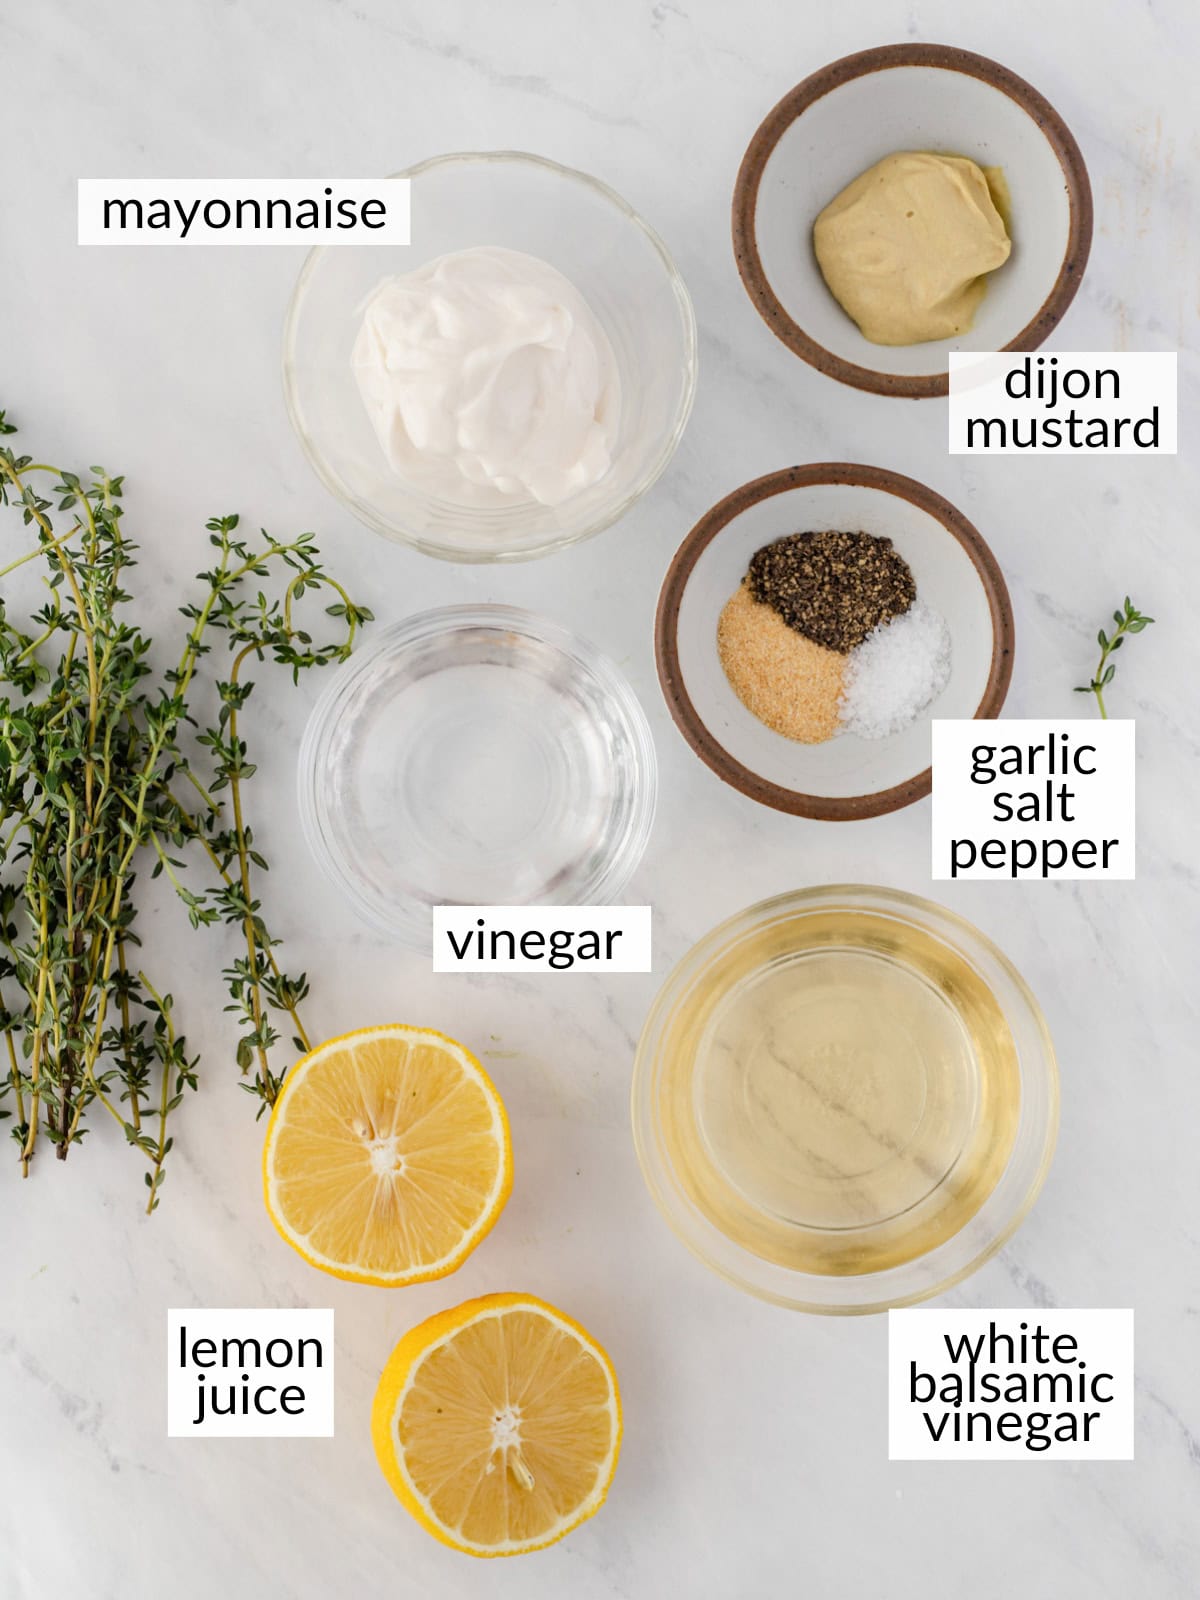 Ingredients for creamy white balsamic dressing.